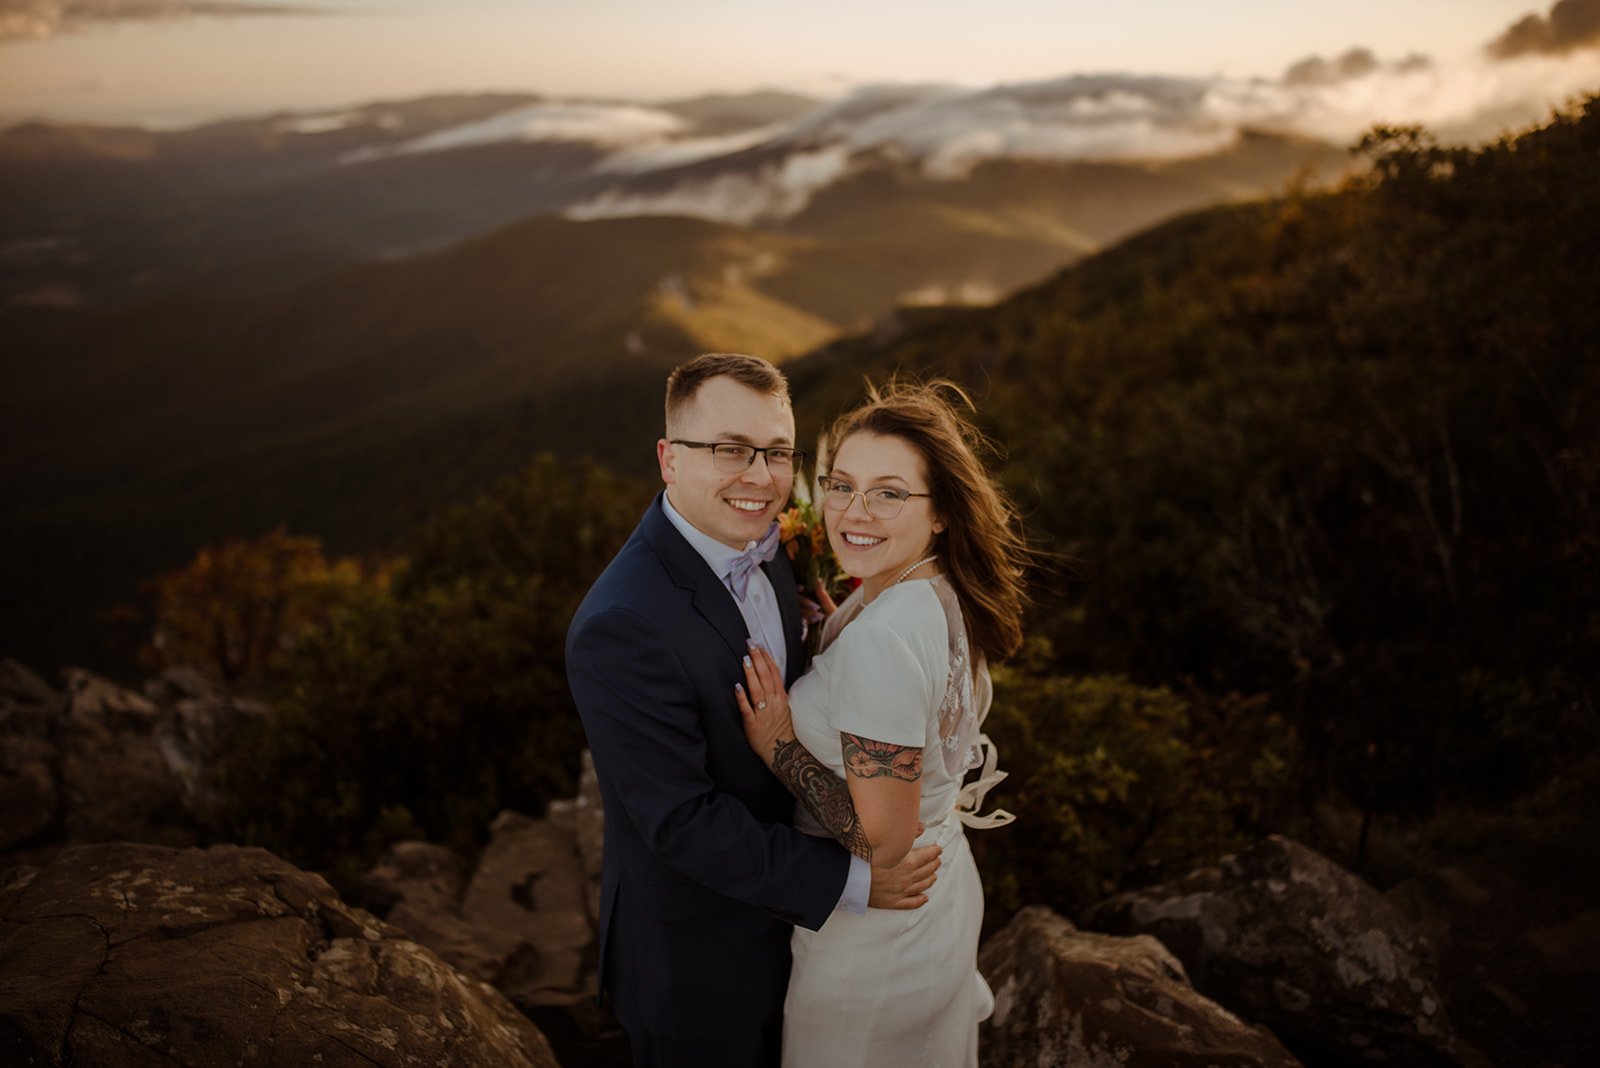 Shenandoah National Park Hiking Elopement with Guests - White Sails Creative_79.jpg